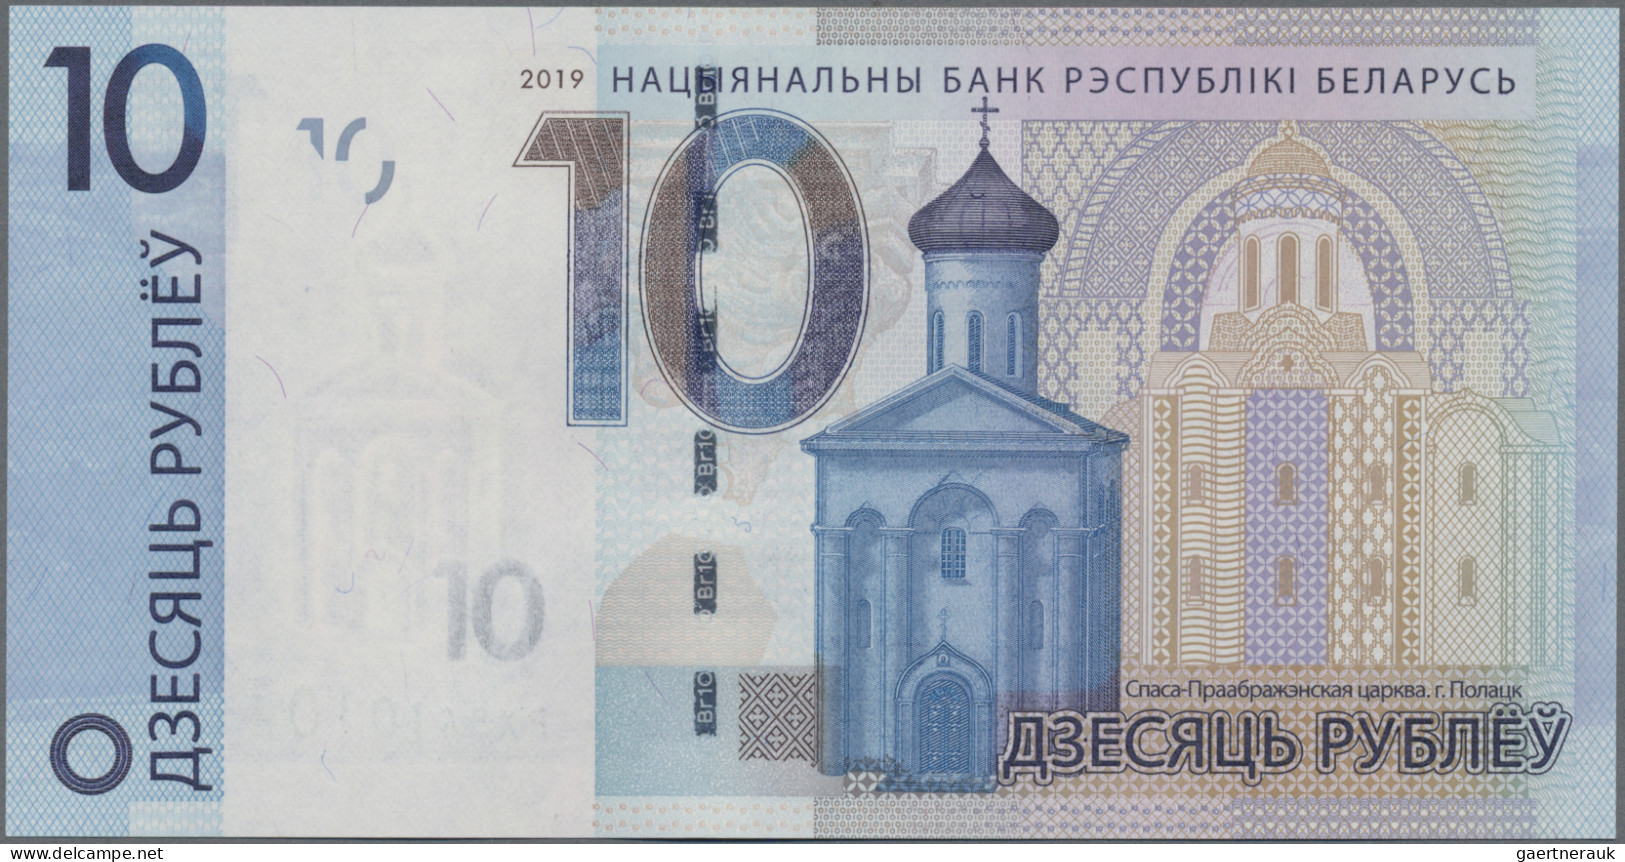 Belarus: National Bank of Belarus, set with 7 banknotes, series 2019-2022, with